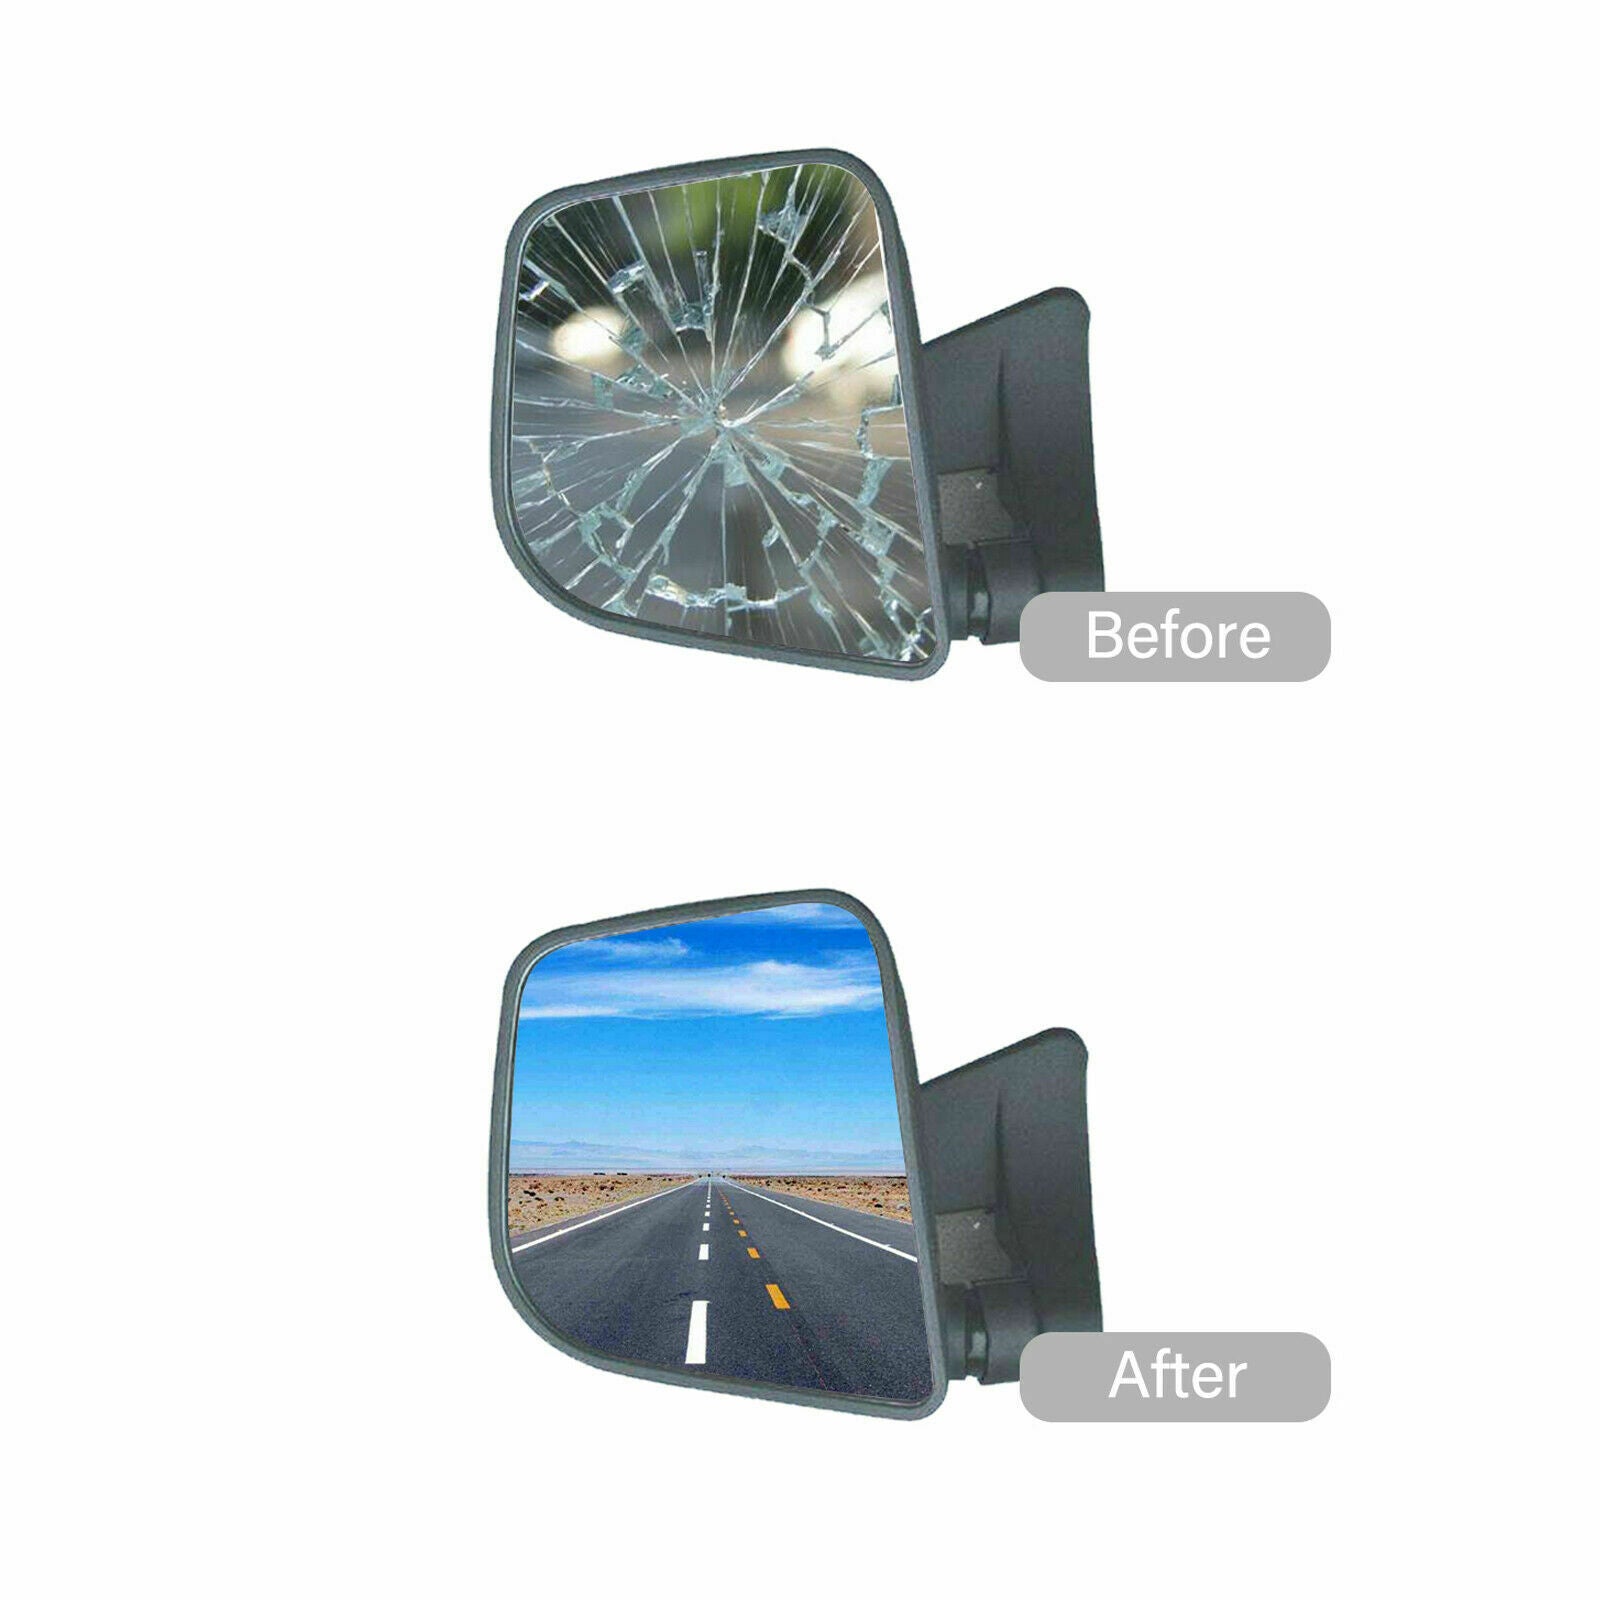 WLLW Towing Upper Replacement Mirror Glass for 2004-2019 Nissan Titan/2016-2021 Nissan Titan XD, Driver Left Side LH/Passenger Right Side RH/The Both Sides Flat M-0040